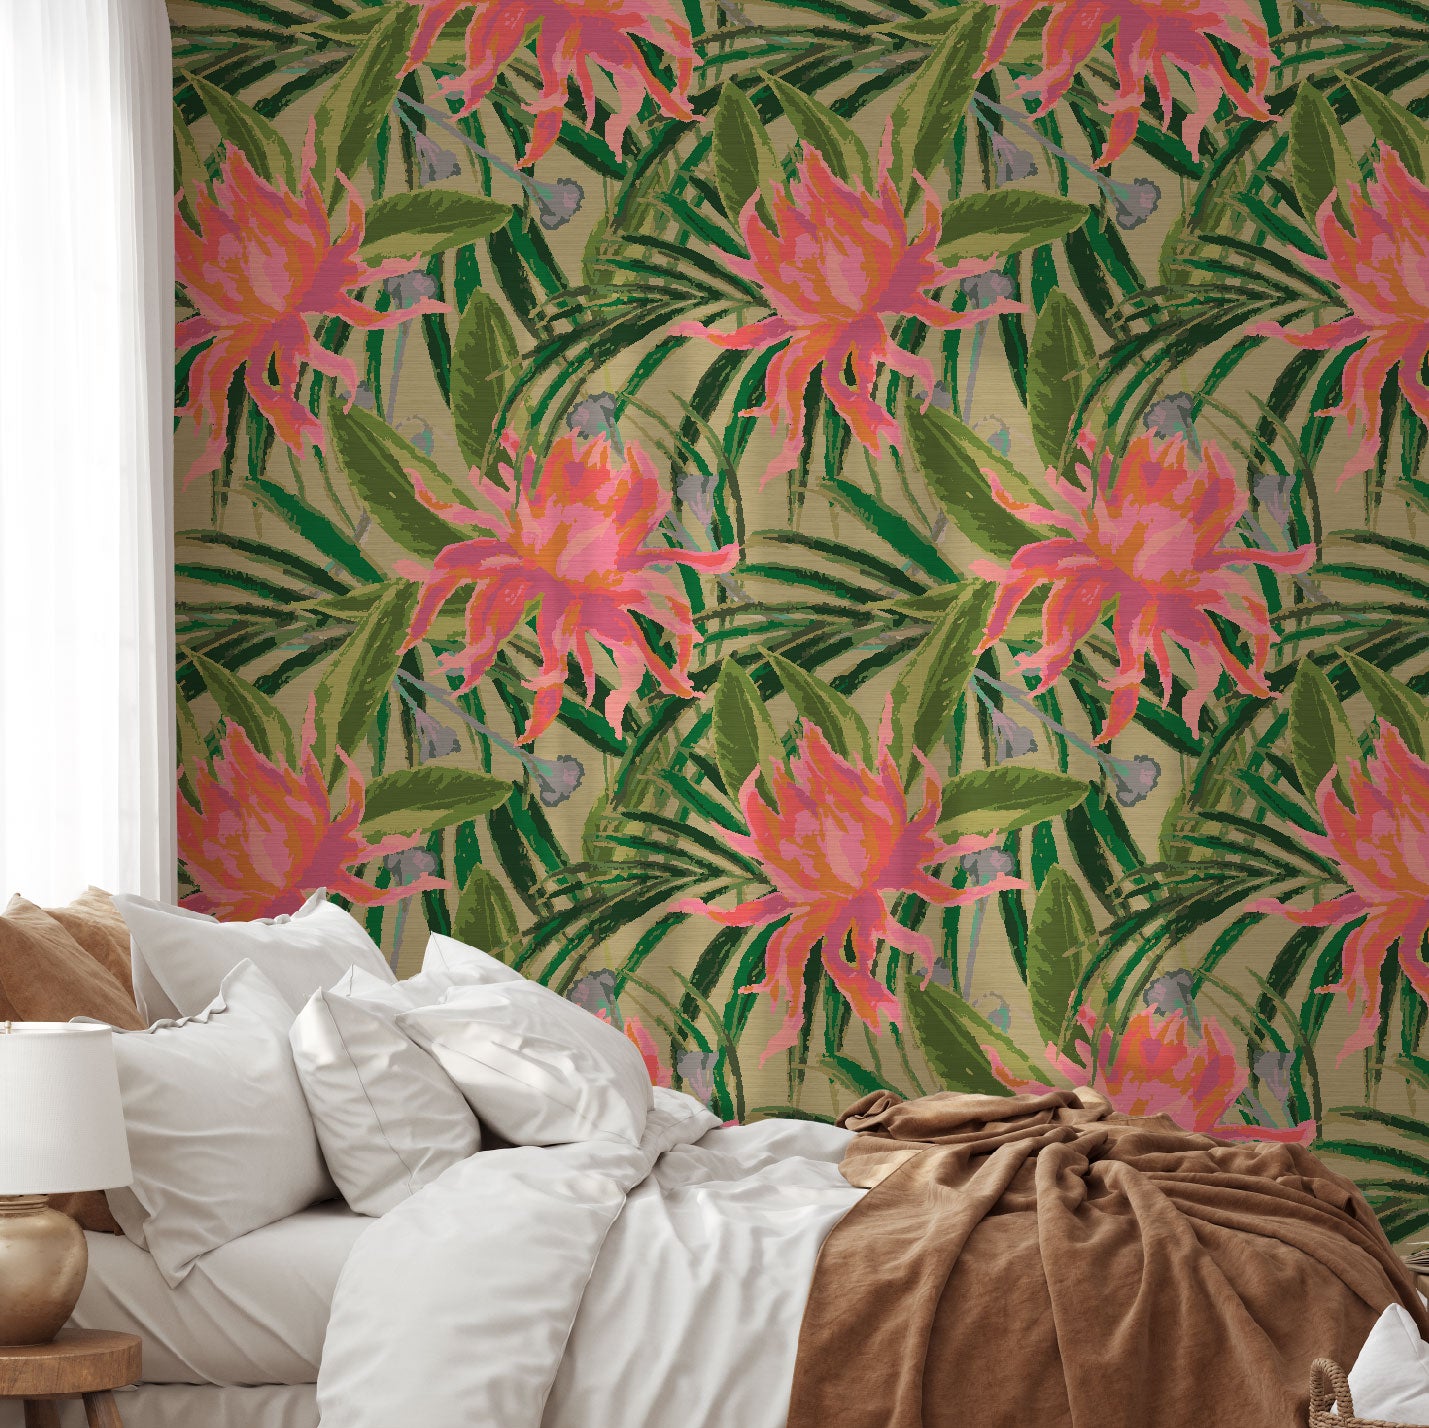 grasscloth wallpaper with olive green based featuring oversized painterly tropical flowers and palm leafs in striking shades of pink, orange and lavender and leafs in shades of deep green Natural Textured Eco-Friendly Non-toxic High-quality Sustainable Interior Design Bold Custom Tailor-made Retro chic Tropical Jungle Coastal preppy Garden Seaside Coastal Seashore Waterfront Vacation home styling Retreat Relaxed beach vibes Beach cottage Shoreline Oceanfront botanical palm leaf bedroomm